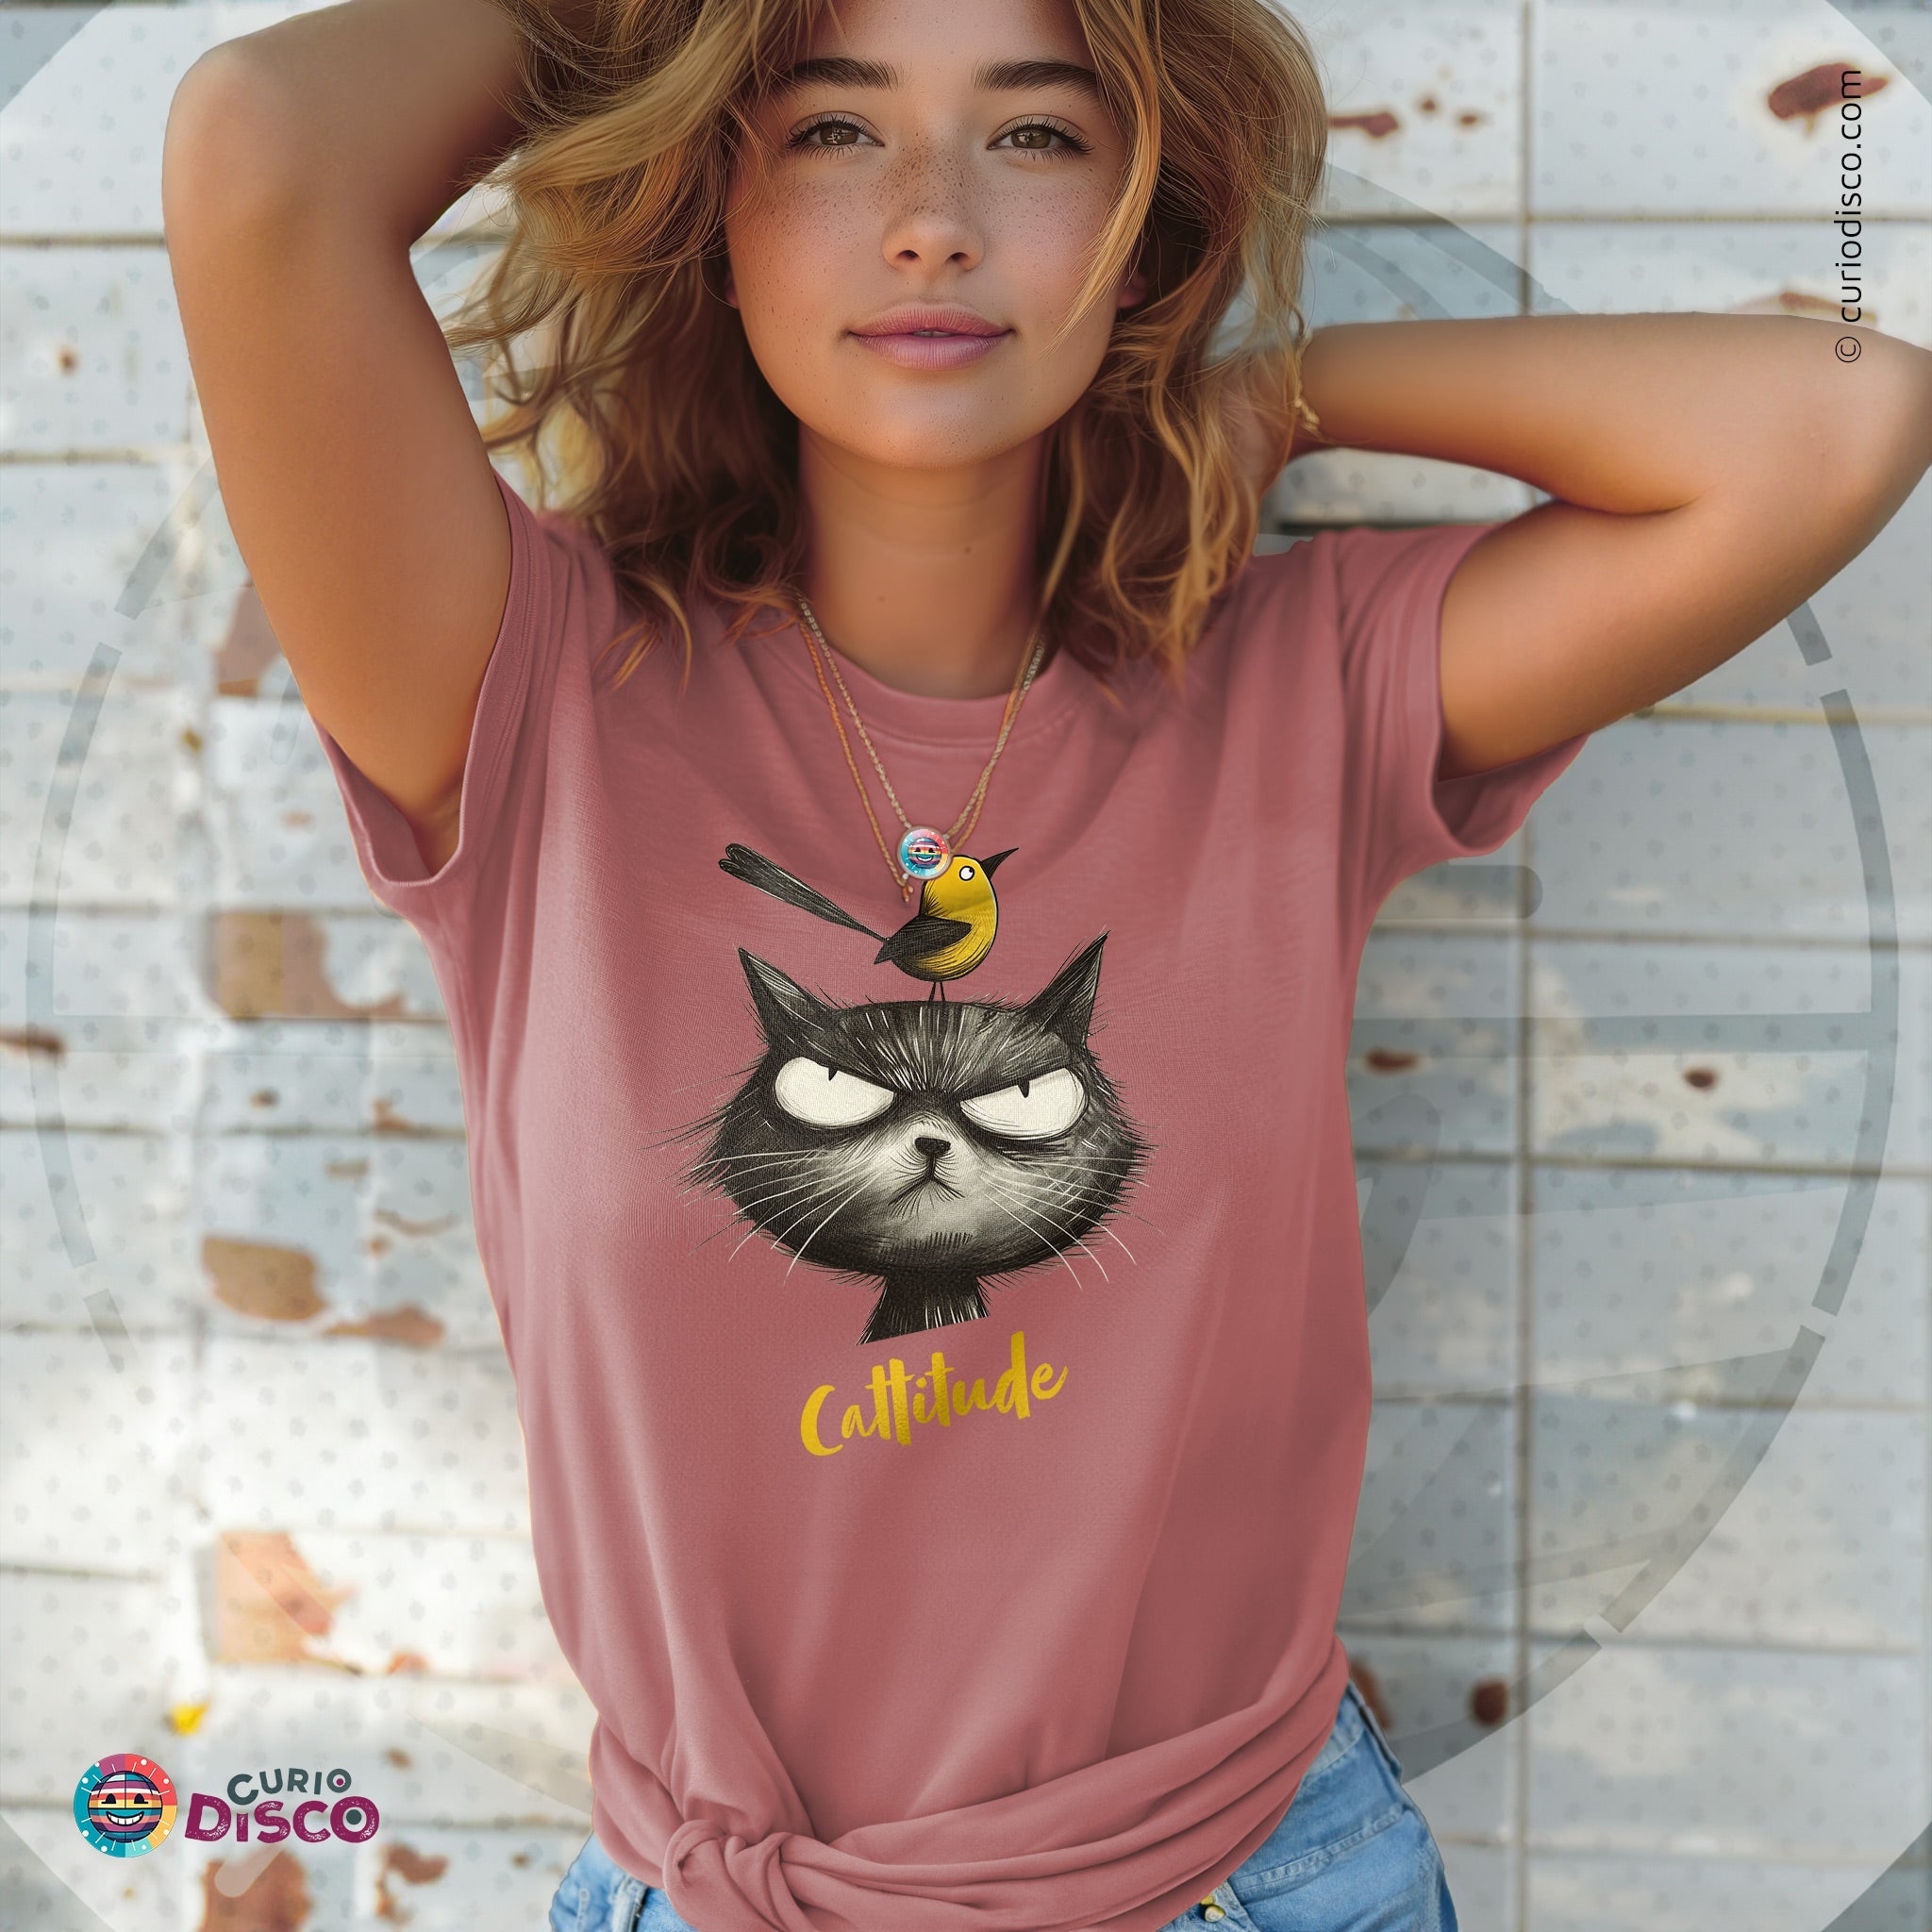 Mauve, short sleeve t-shirt, a funny cat shirt and ironic shirt blend, great as gifts for girlfriend, cat lover gift, and meme shirt. Cat yoga, treat yourself, gifts for cat lovers and cat people. Custom pet shirt available in plus size.